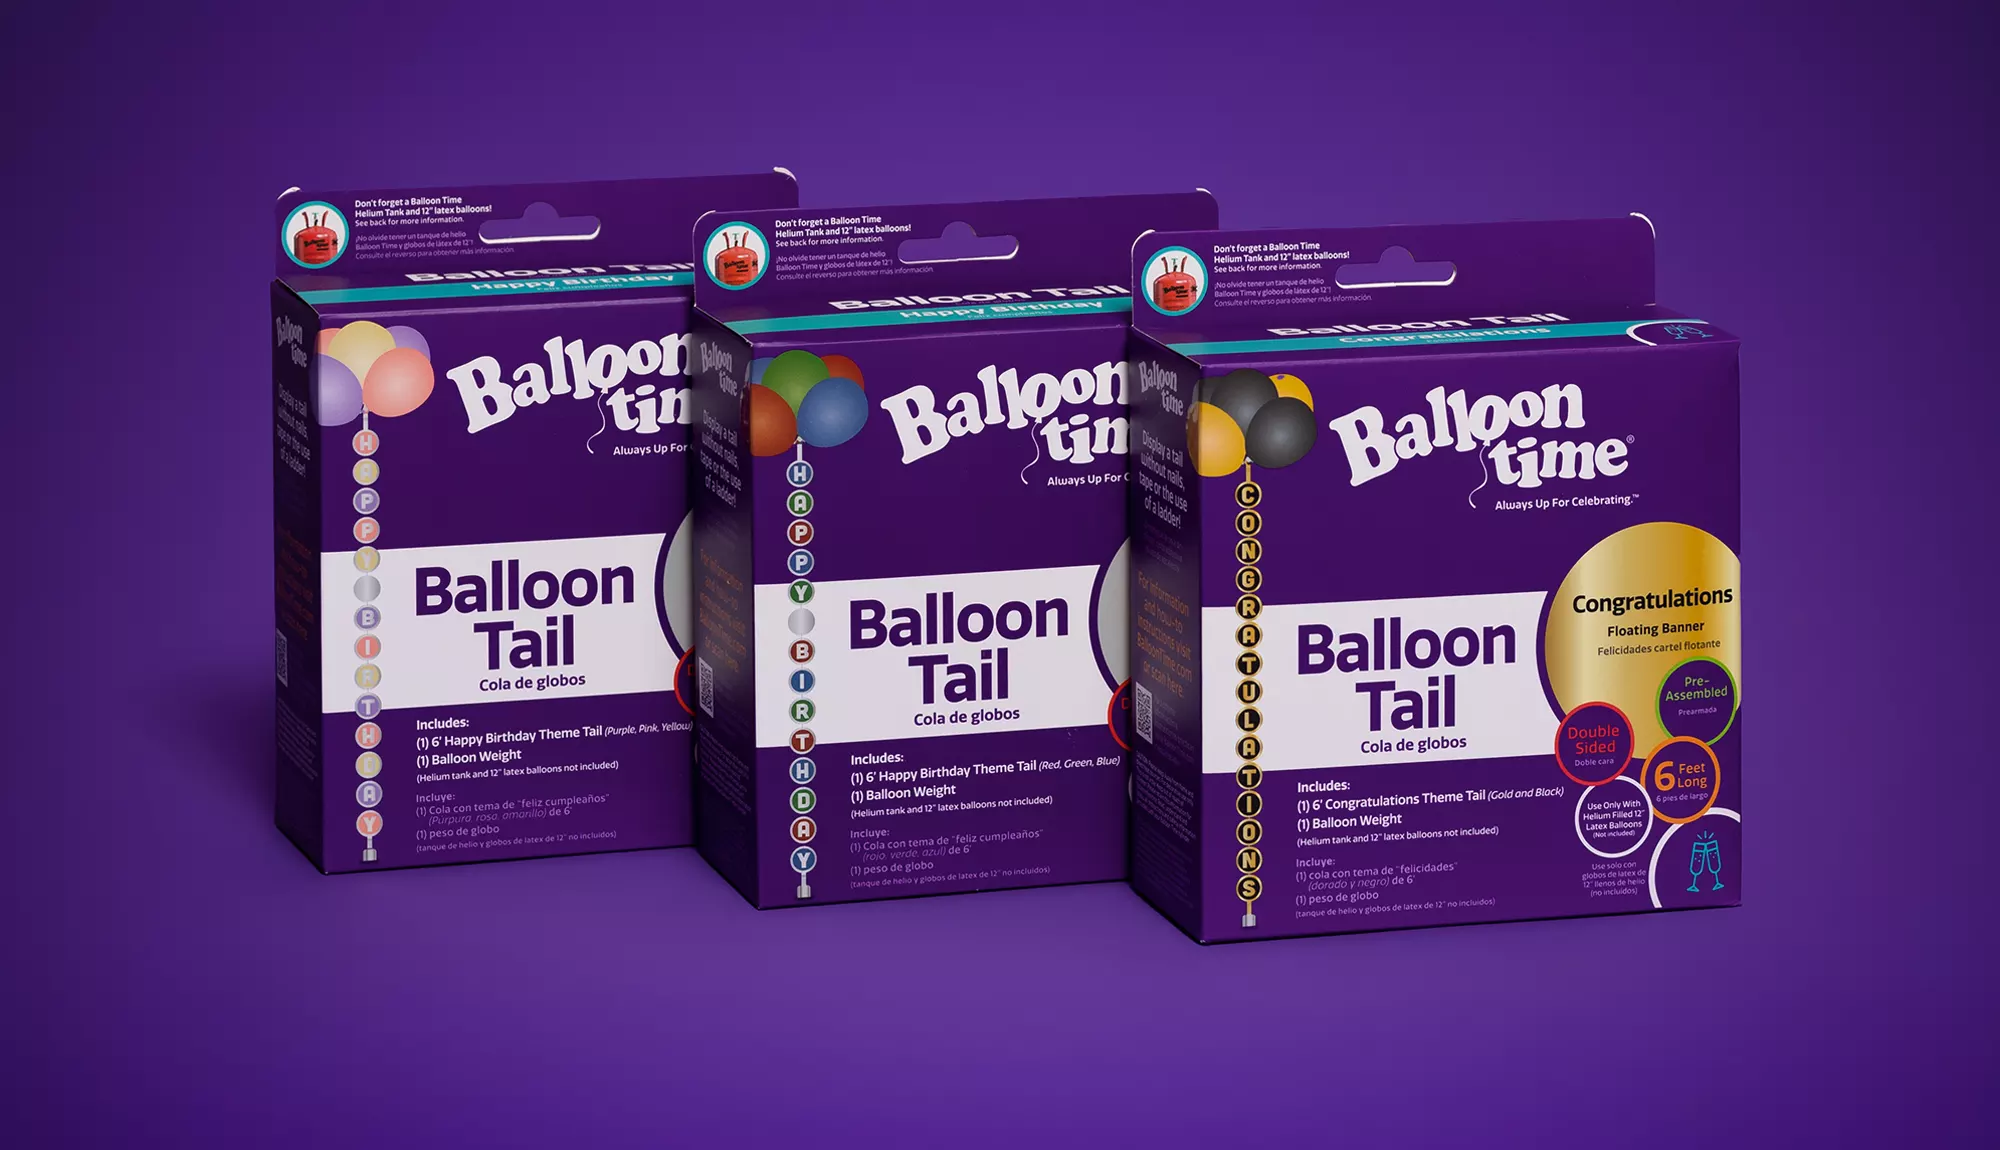 Balloon Tail boxes, variety of styles